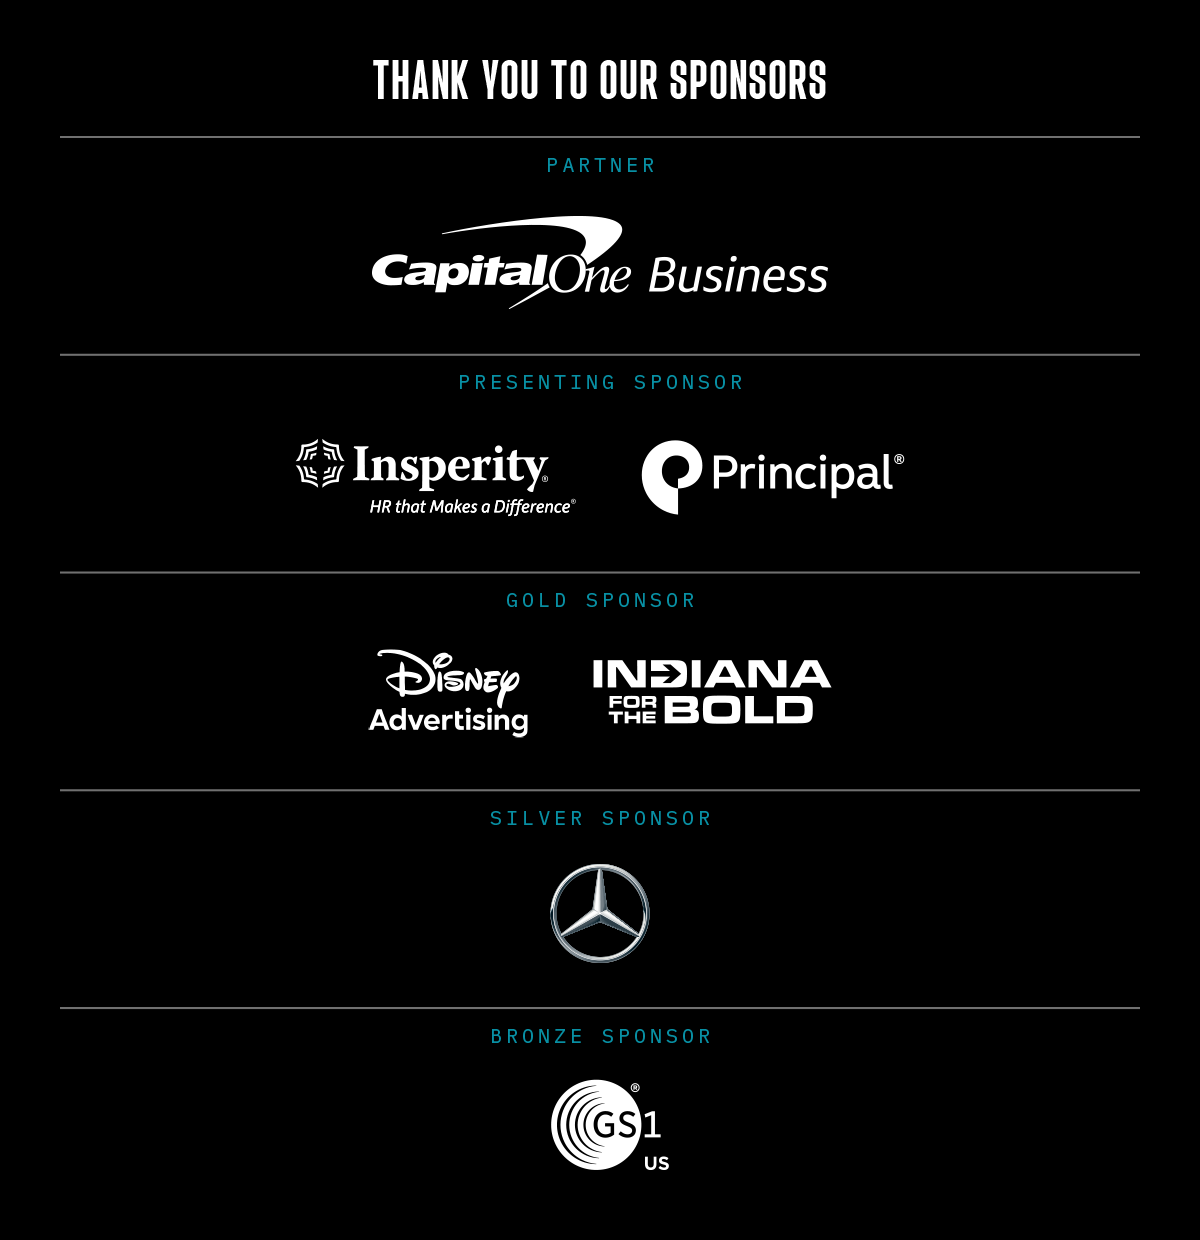 Thank You to Our Sponsors: CapitalOne Business | Insperity | Principal | Indiana Economic Development Corp | Mercedes | GS1 US